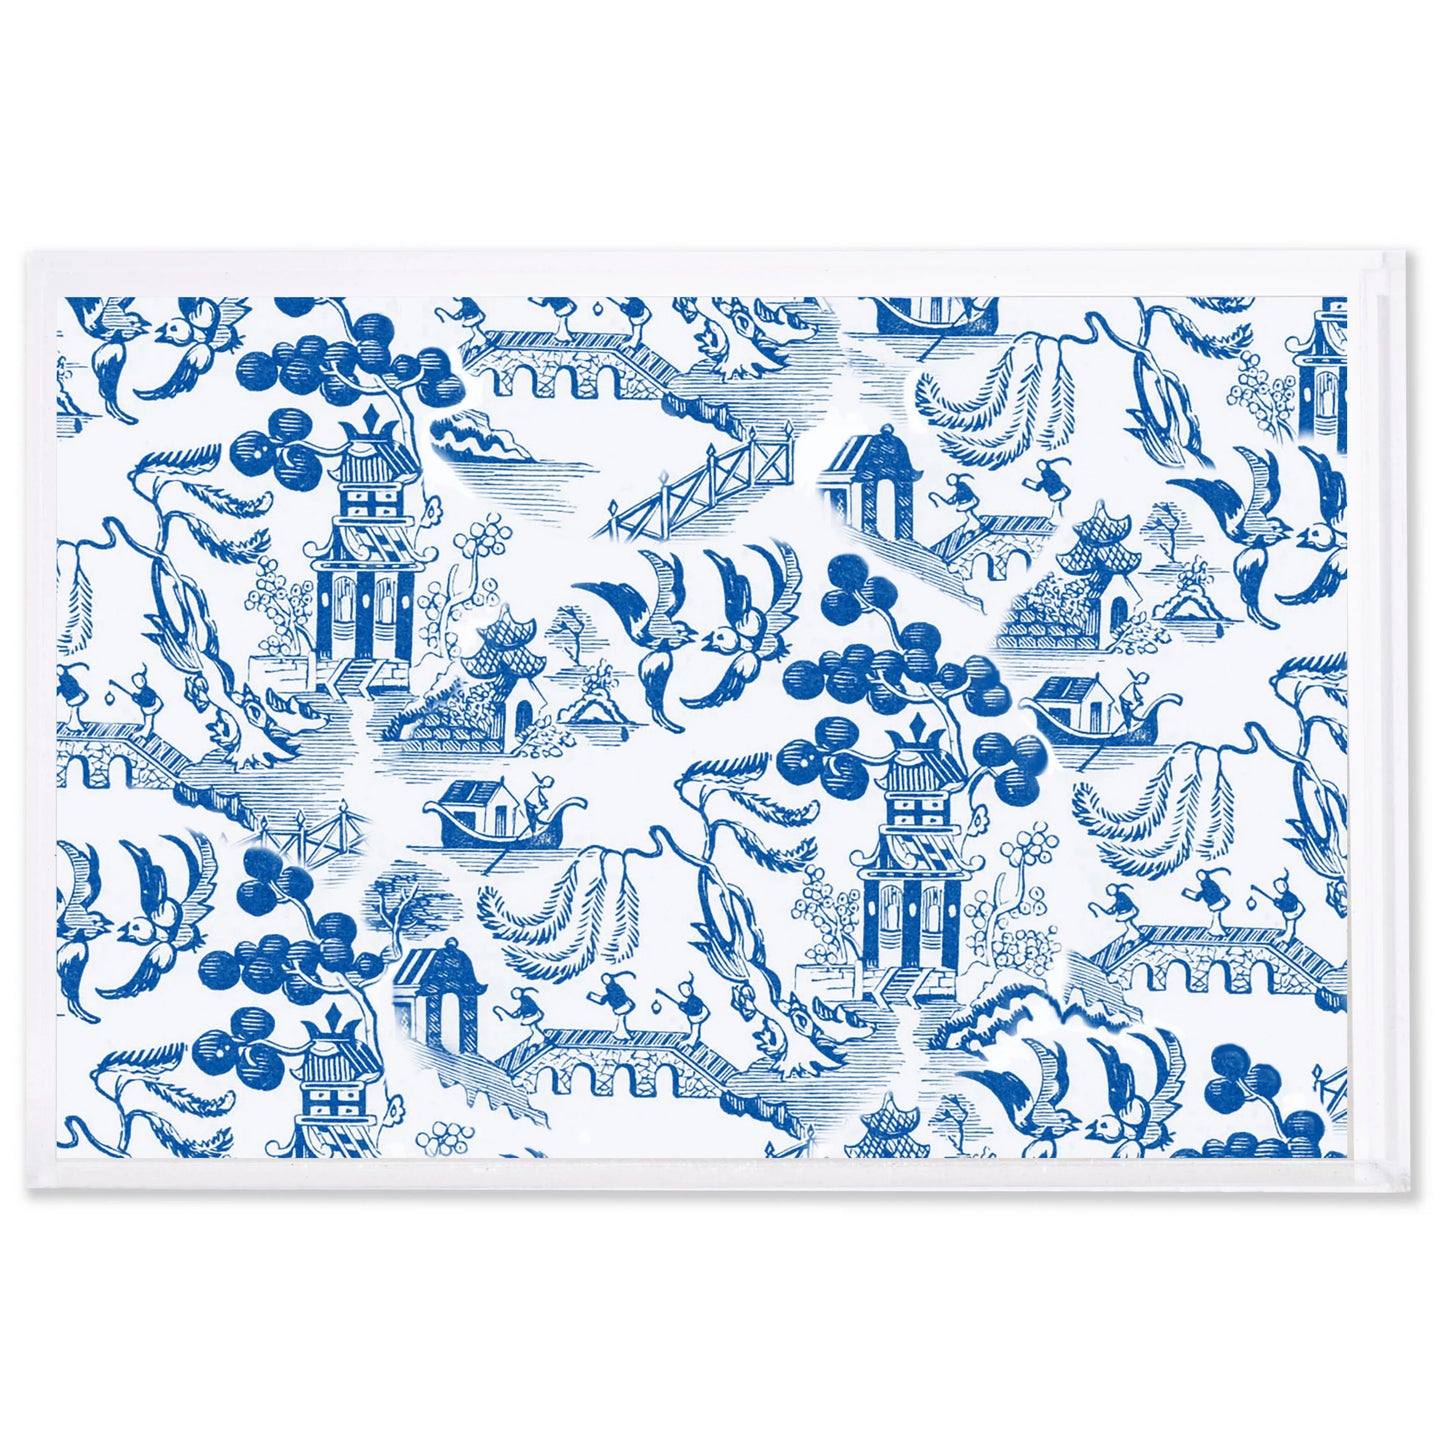 Chinoiserie Tray